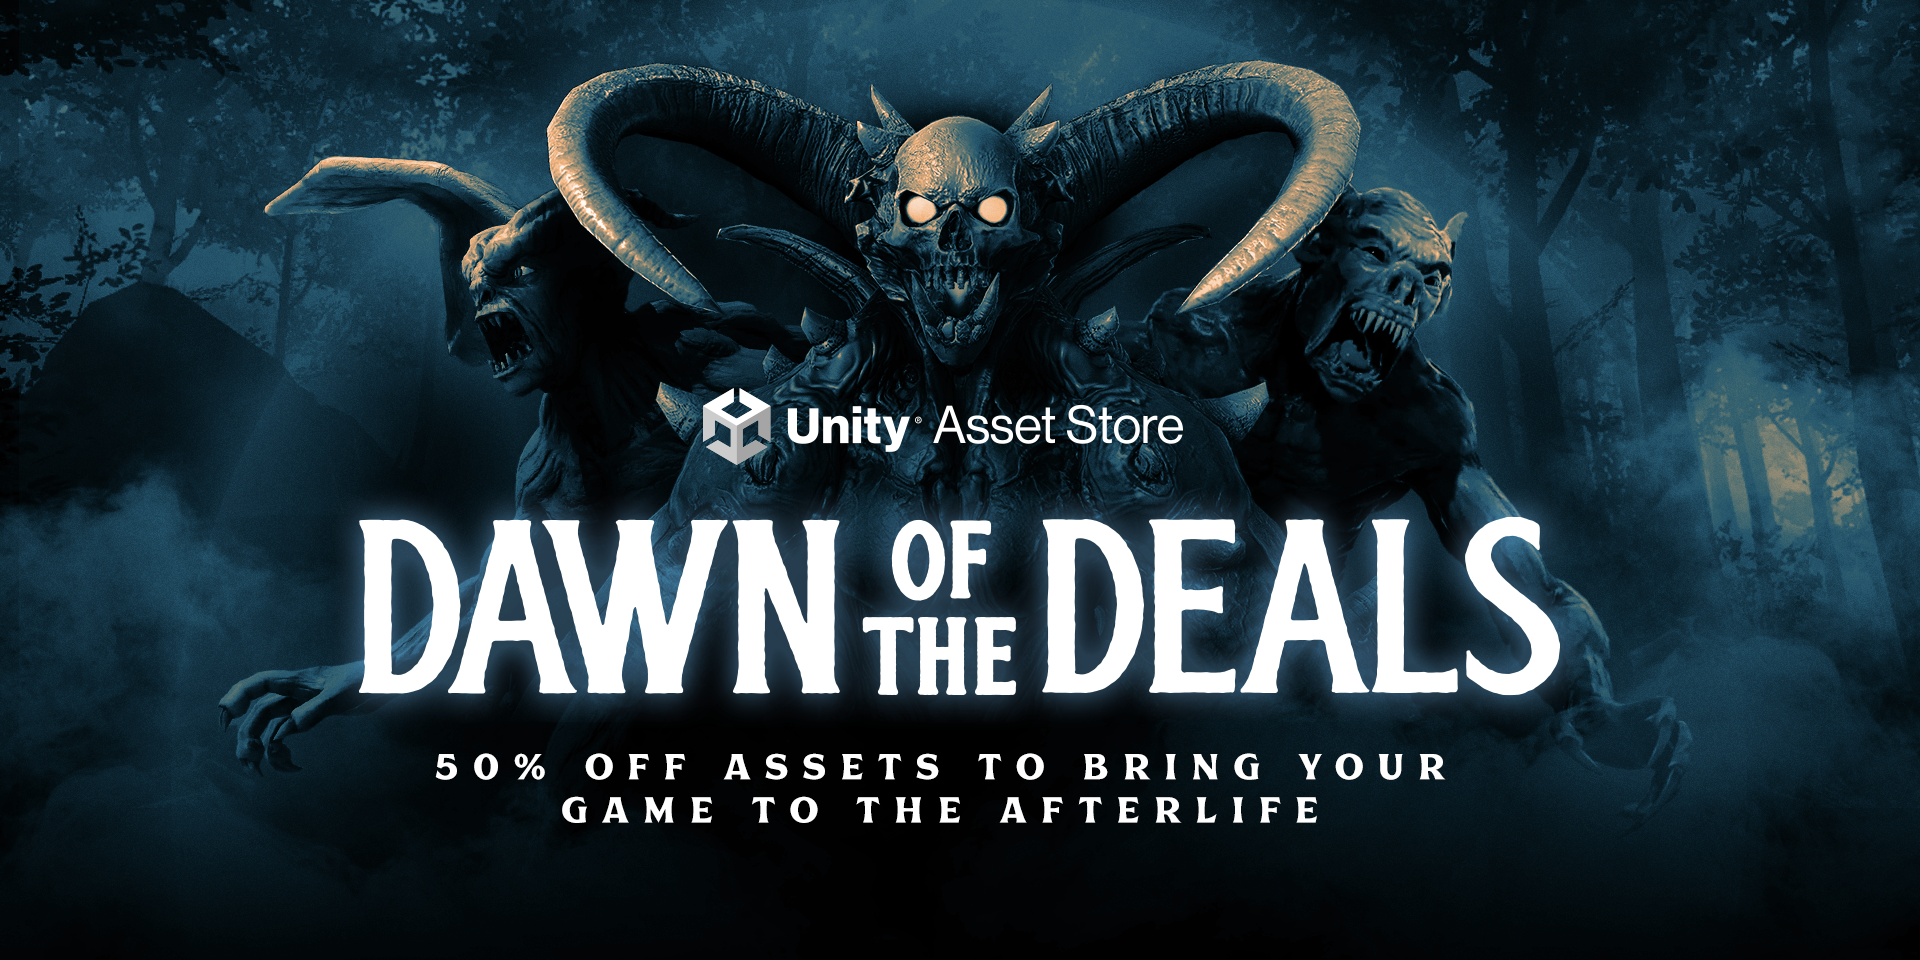 Image with a scary ghoul as backdrop to text: "Dawn of the Deals - 50% off assets to bring you game to the afterlife"